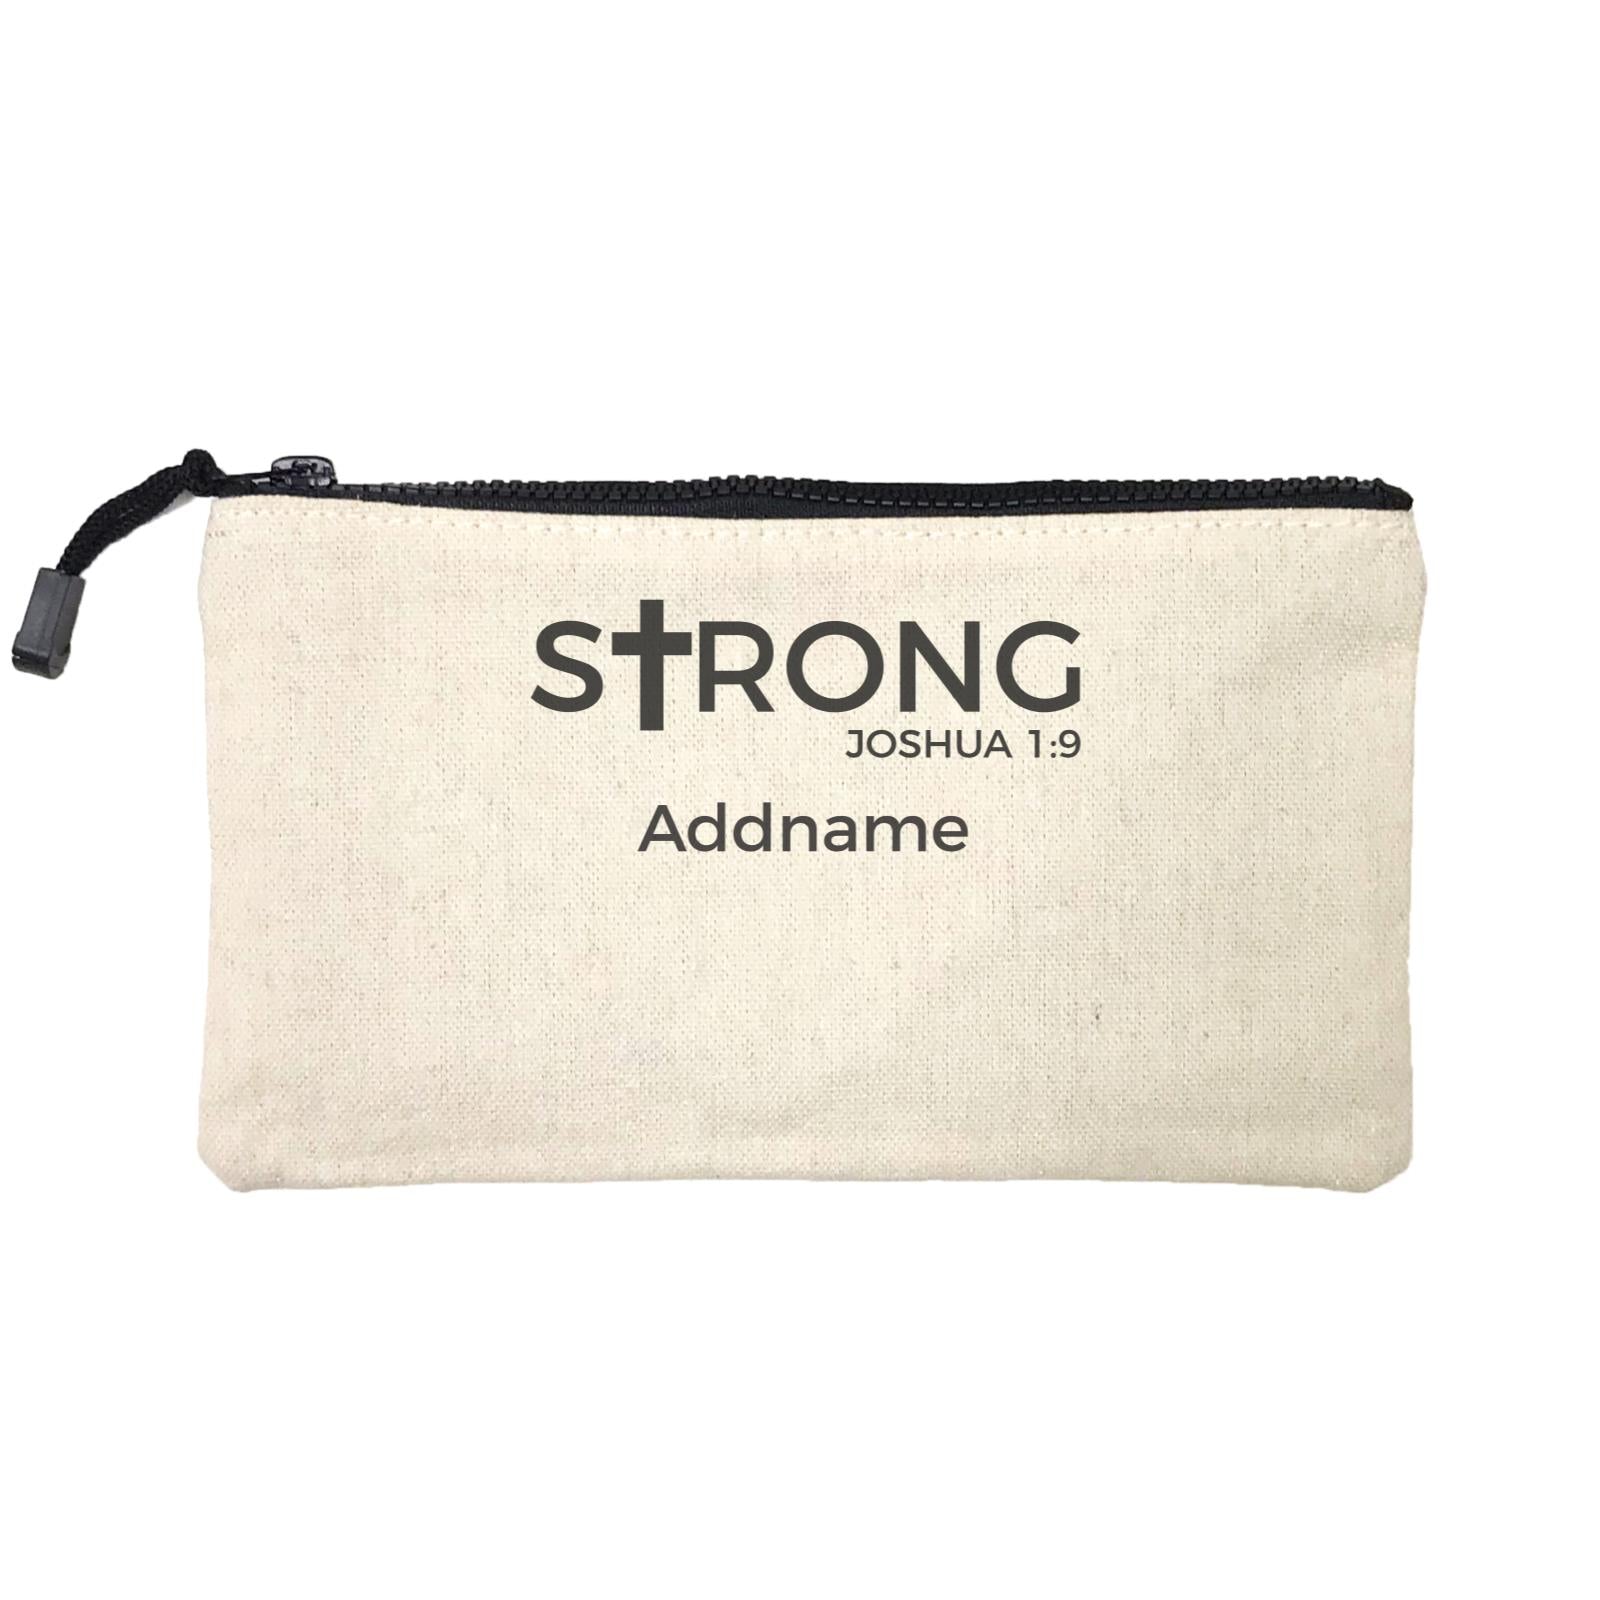 Christian Series Strong Joshua 1.9 Addname Mini Accessories Stationery Pouch